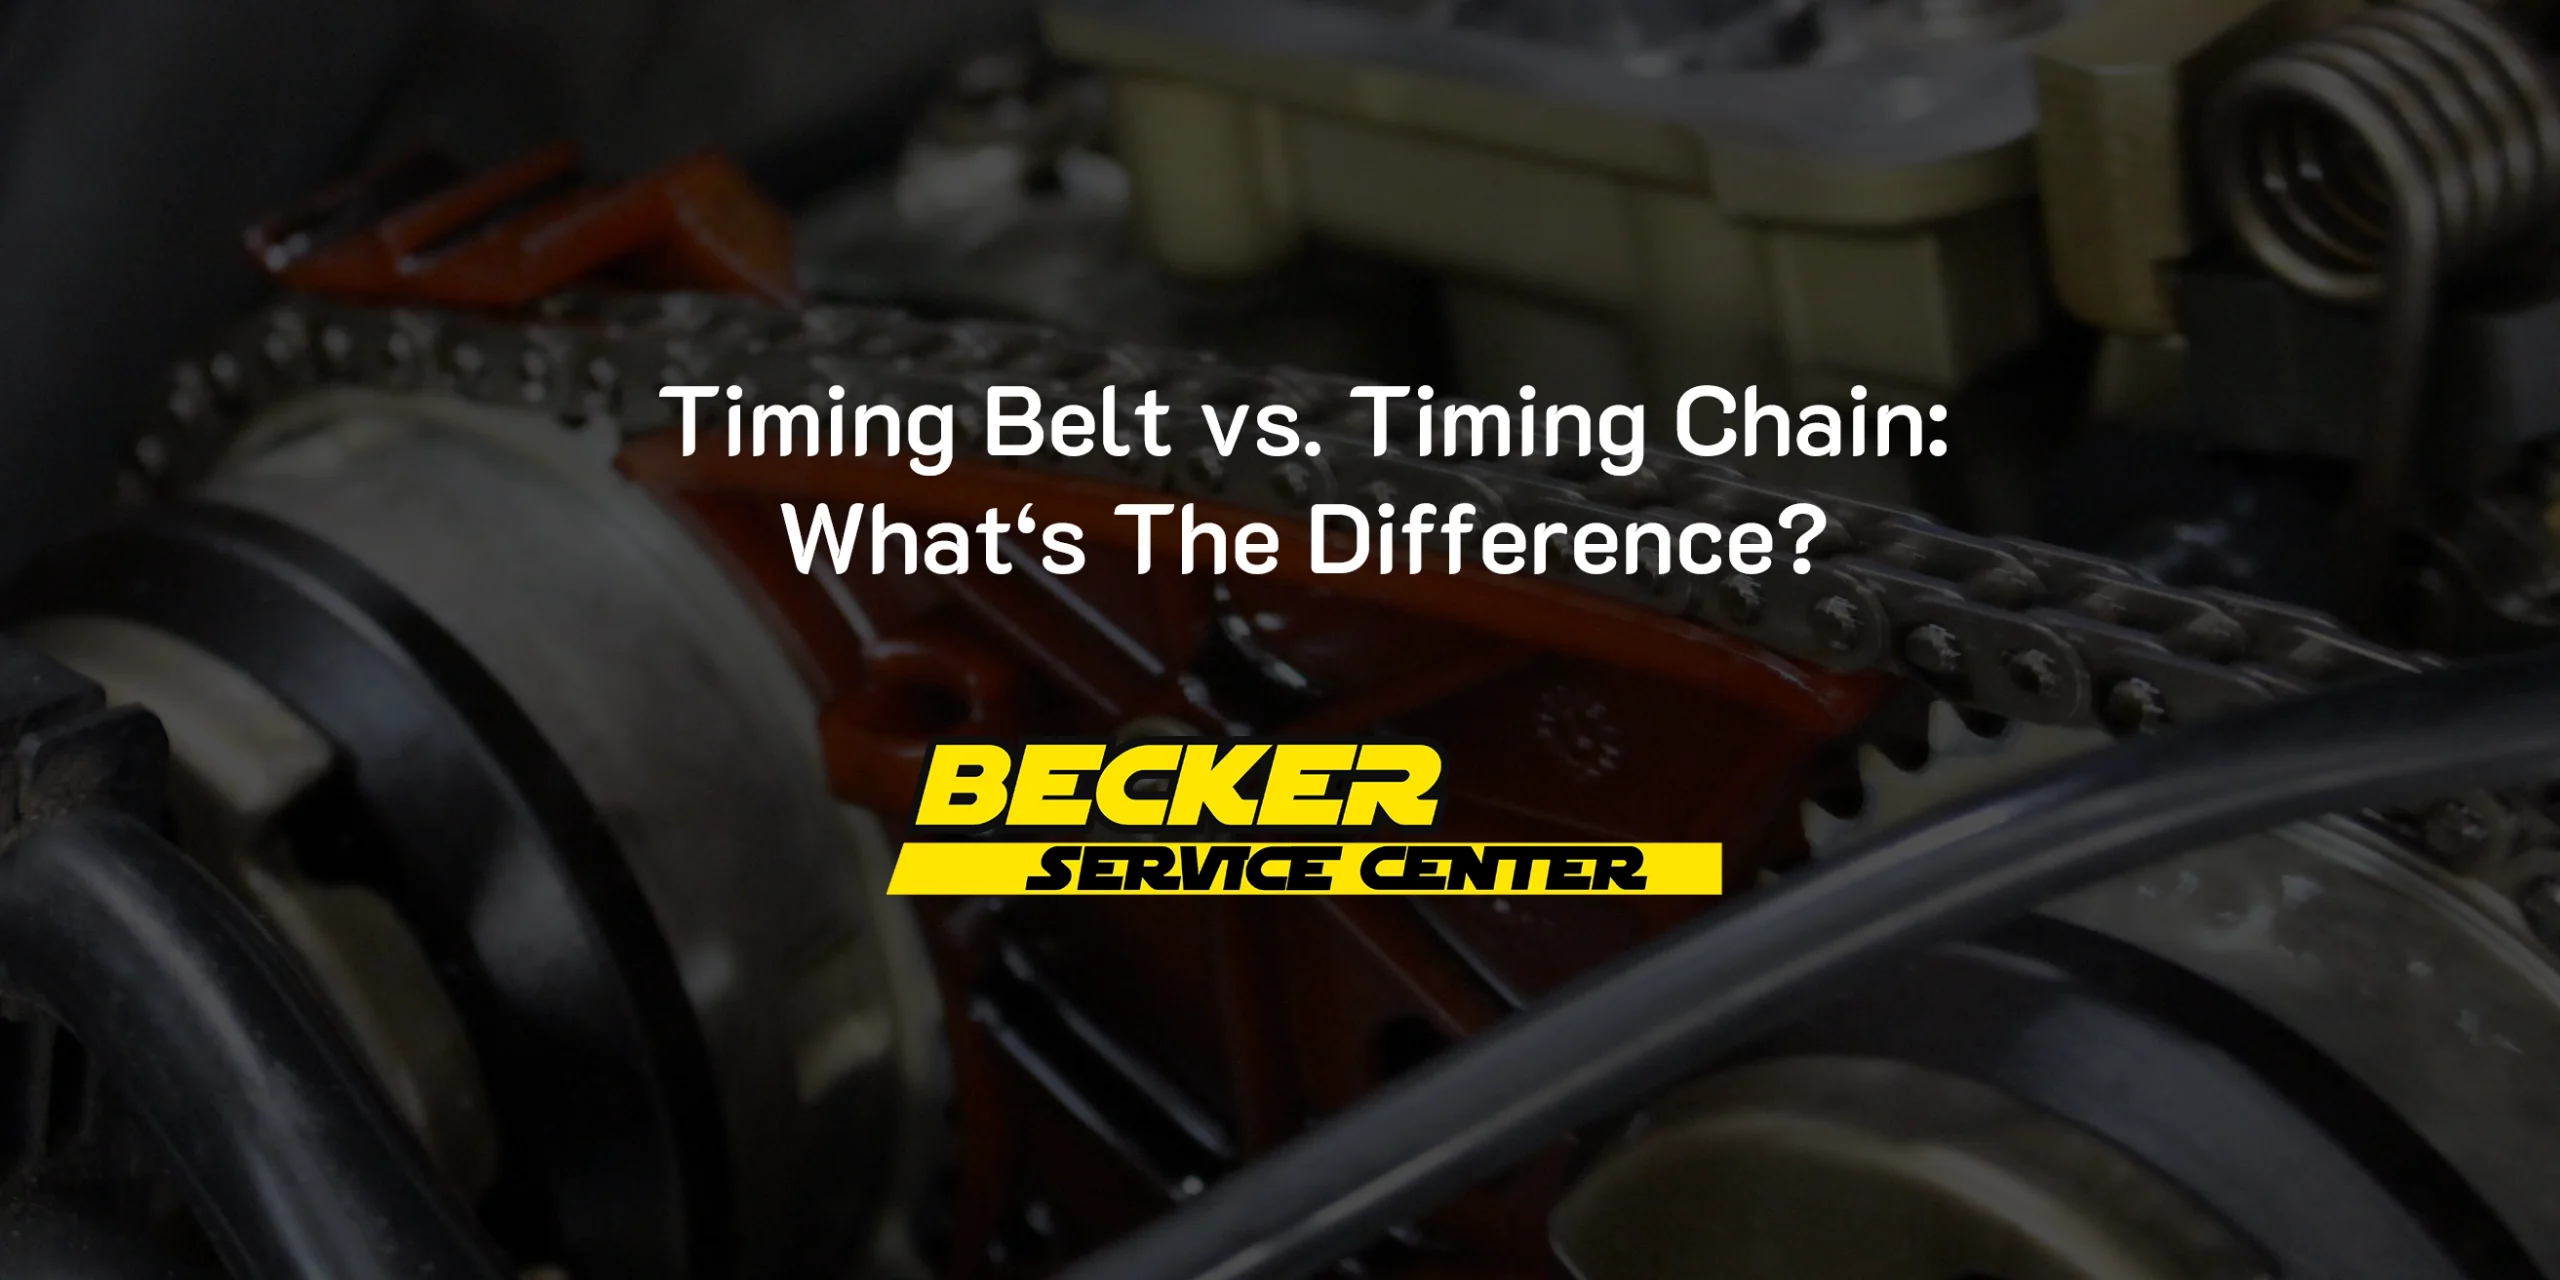 Timing Belt vs. Timing Chain: What’s the Difference?